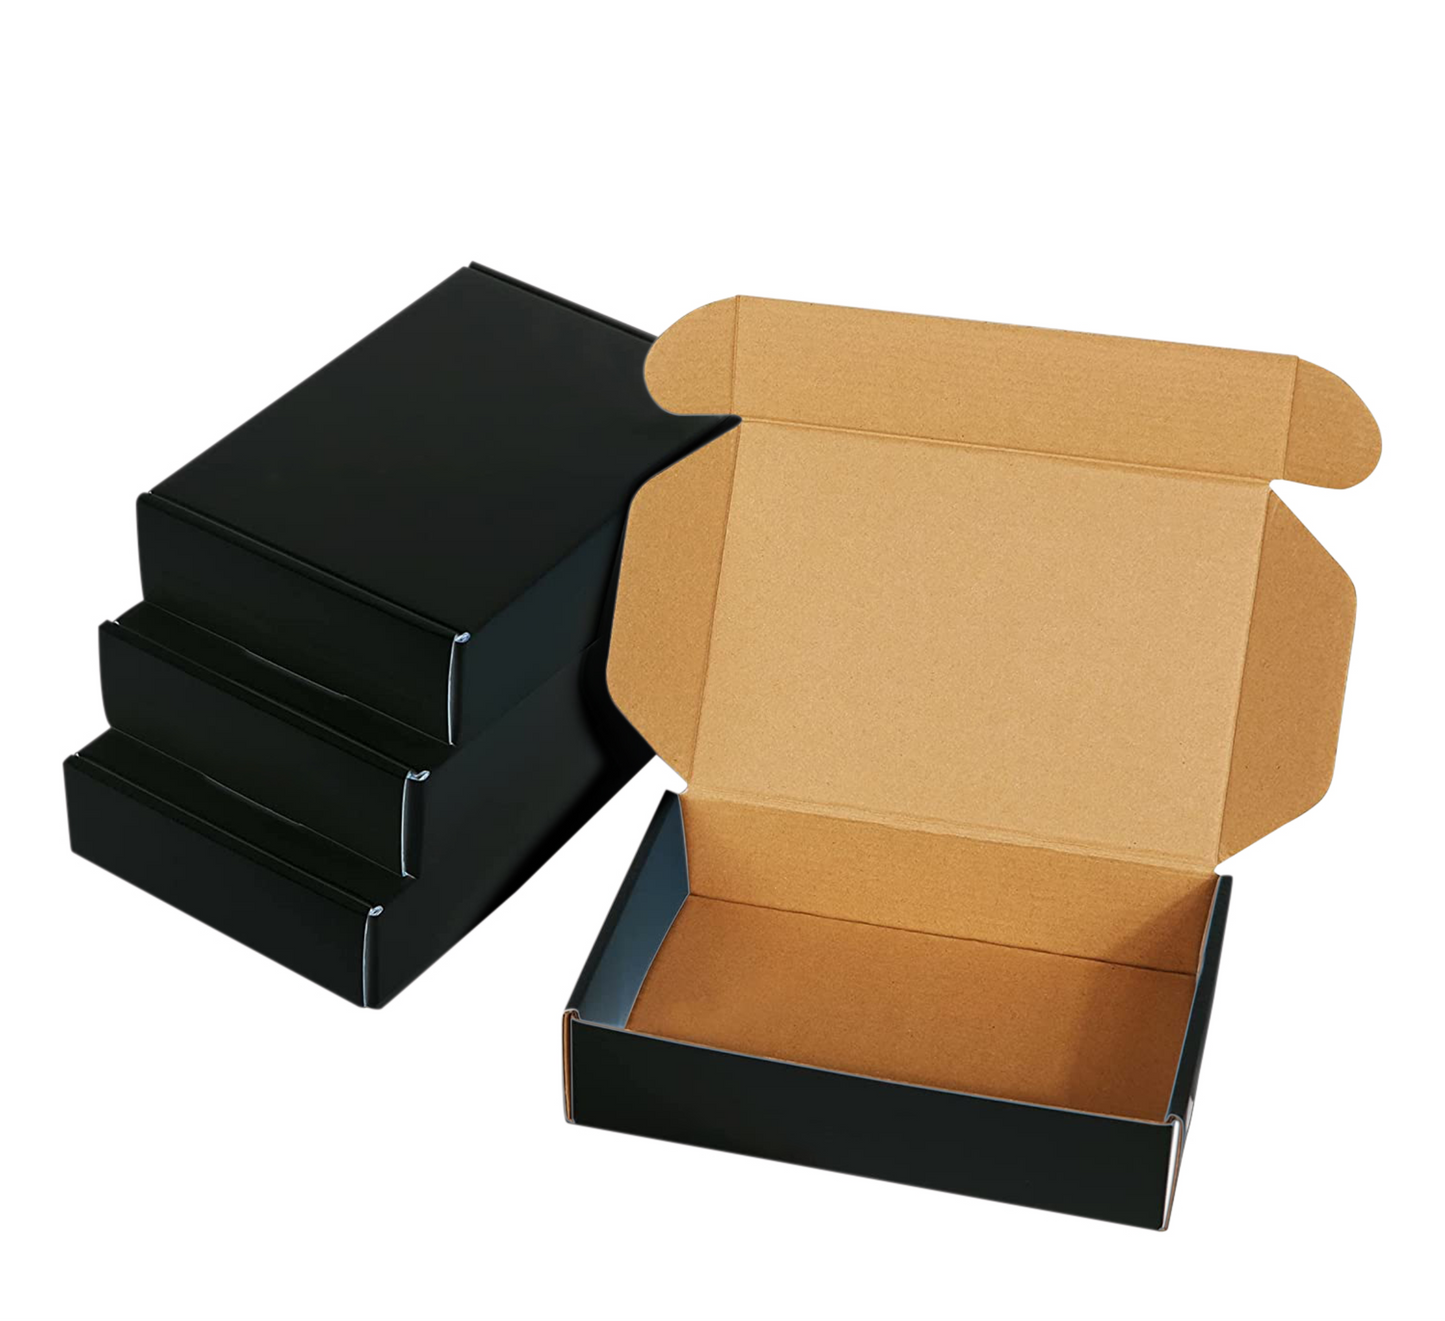 Mailer Boxes (10x8x3 Inches)